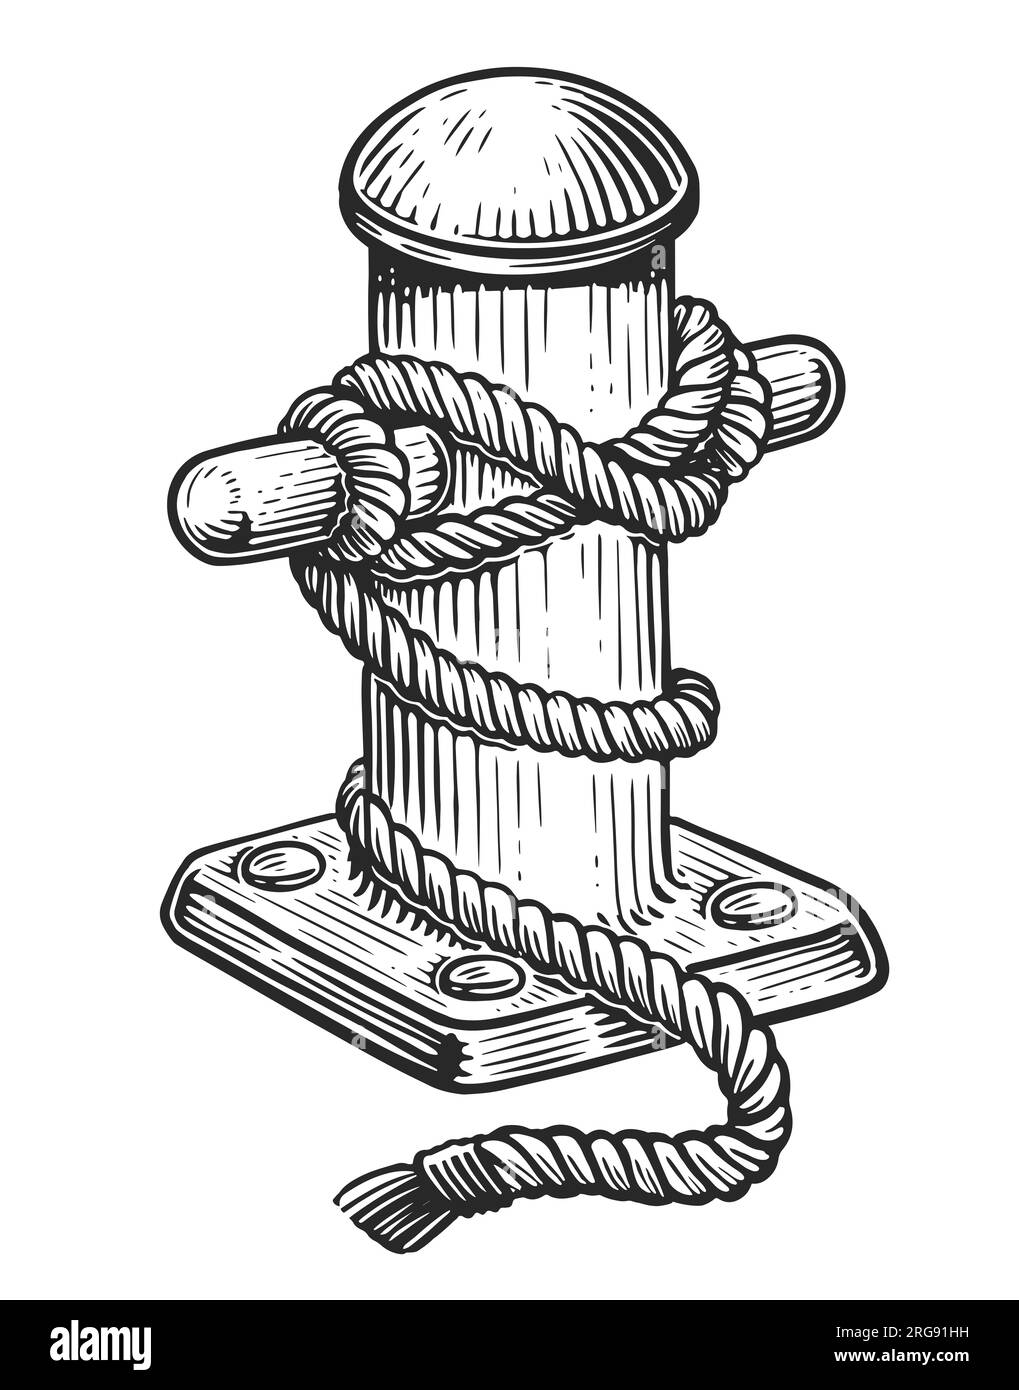 Old marine bollard with rope tied on pier. Hand drawn sketch vintage illustration Stock Photo